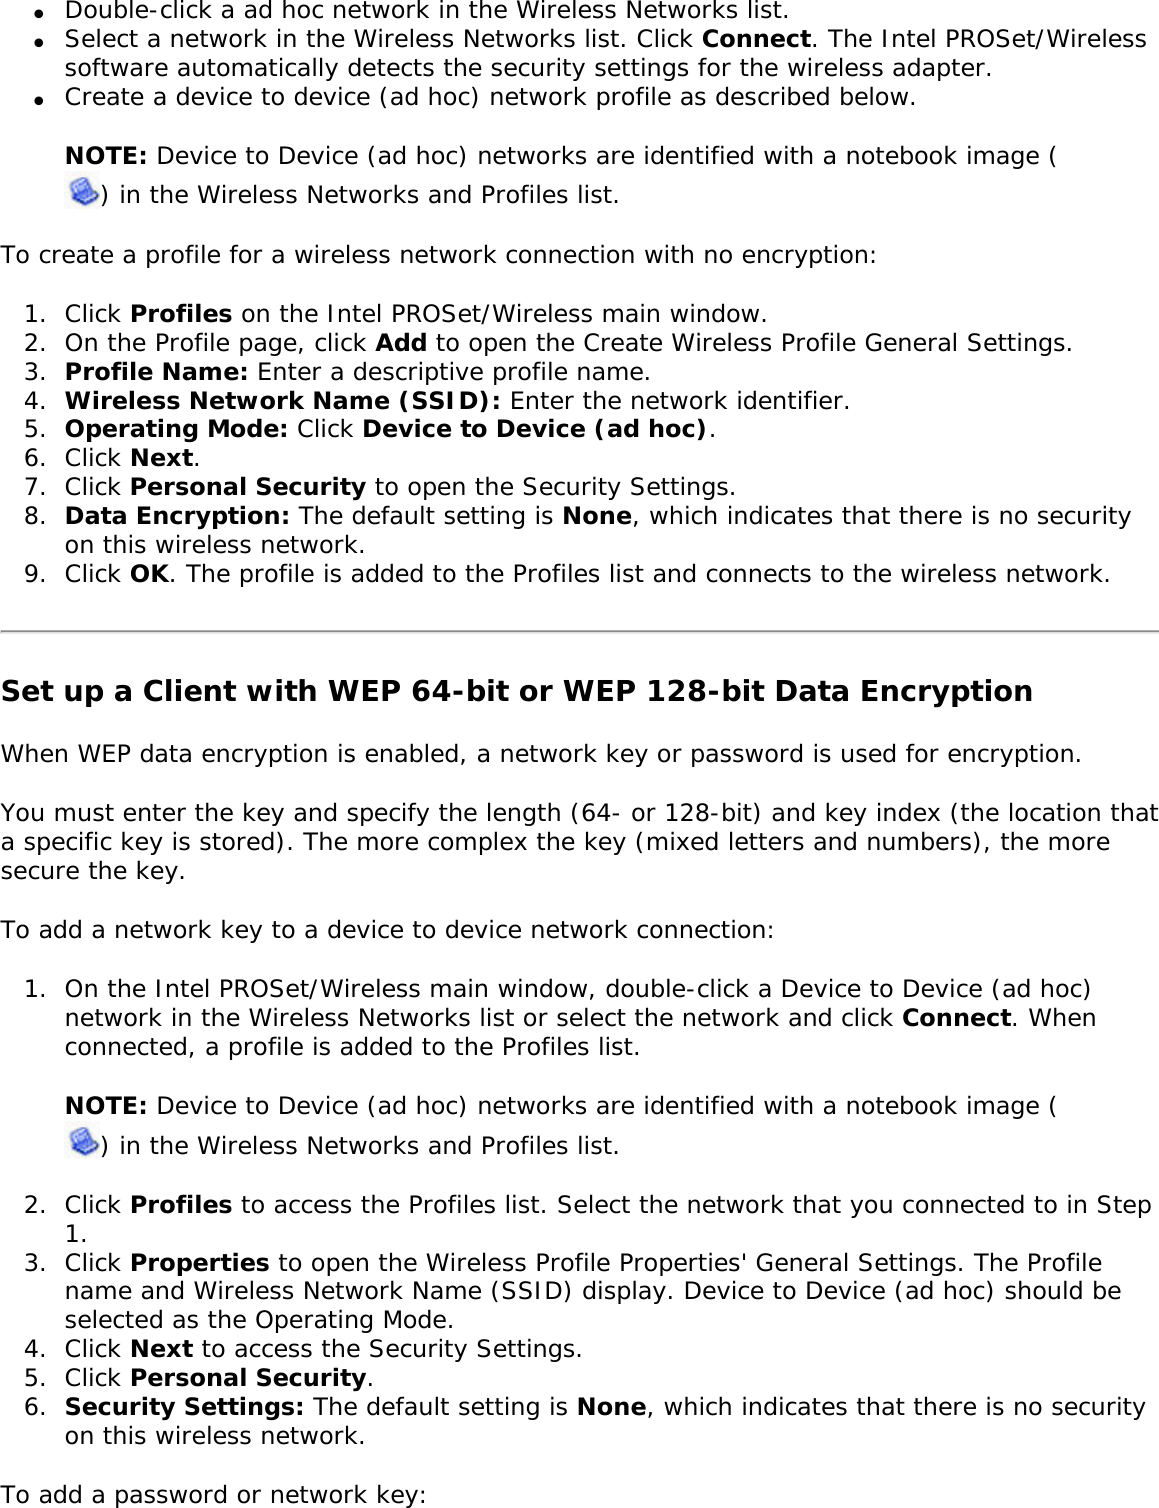 ●     Double-click a ad hoc network in the Wireless Networks list.●     Select a network in the Wireless Networks list. Click Connect. The Intel PROSet/Wireless software automatically detects the security settings for the wireless adapter.●     Create a device to device (ad hoc) network profile as described below. NOTE: Device to Device (ad hoc) networks are identified with a notebook image () in the Wireless Networks and Profiles list. To create a profile for a wireless network connection with no encryption: 1.  Click Profiles on the Intel PROSet/Wireless main window. 2.  On the Profile page, click Add to open the Create Wireless Profile General Settings.3.  Profile Name: Enter a descriptive profile name.4.  Wireless Network Name (SSID): Enter the network identifier. 5.  Operating Mode: Click Device to Device (ad hoc). 6.  Click Next.7.  Click Personal Security to open the Security Settings.8.  Data Encryption: The default setting is None, which indicates that there is no security on this wireless network.9.  Click OK. The profile is added to the Profiles list and connects to the wireless network.Set up a Client with WEP 64-bit or WEP 128-bit Data EncryptionWhen WEP data encryption is enabled, a network key or password is used for encryption. You must enter the key and specify the length (64- or 128-bit) and key index (the location that a specific key is stored). The more complex the key (mixed letters and numbers), the more secure the key. To add a network key to a device to device network connection: 1.  On the Intel PROSet/Wireless main window, double-click a Device to Device (ad hoc) network in the Wireless Networks list or select the network and click Connect. When connected, a profile is added to the Profiles list.NOTE: Device to Device (ad hoc) networks are identified with a notebook image () in the Wireless Networks and Profiles list. 2.  Click Profiles to access the Profiles list. Select the network that you connected to in Step 1.3.  Click Properties to open the Wireless Profile Properties&apos; General Settings. The Profile name and Wireless Network Name (SSID) display. Device to Device (ad hoc) should be selected as the Operating Mode.4.  Click Next to access the Security Settings.5.  Click Personal Security.6.  Security Settings: The default setting is None, which indicates that there is no security on this wireless network.To add a password or network key: 